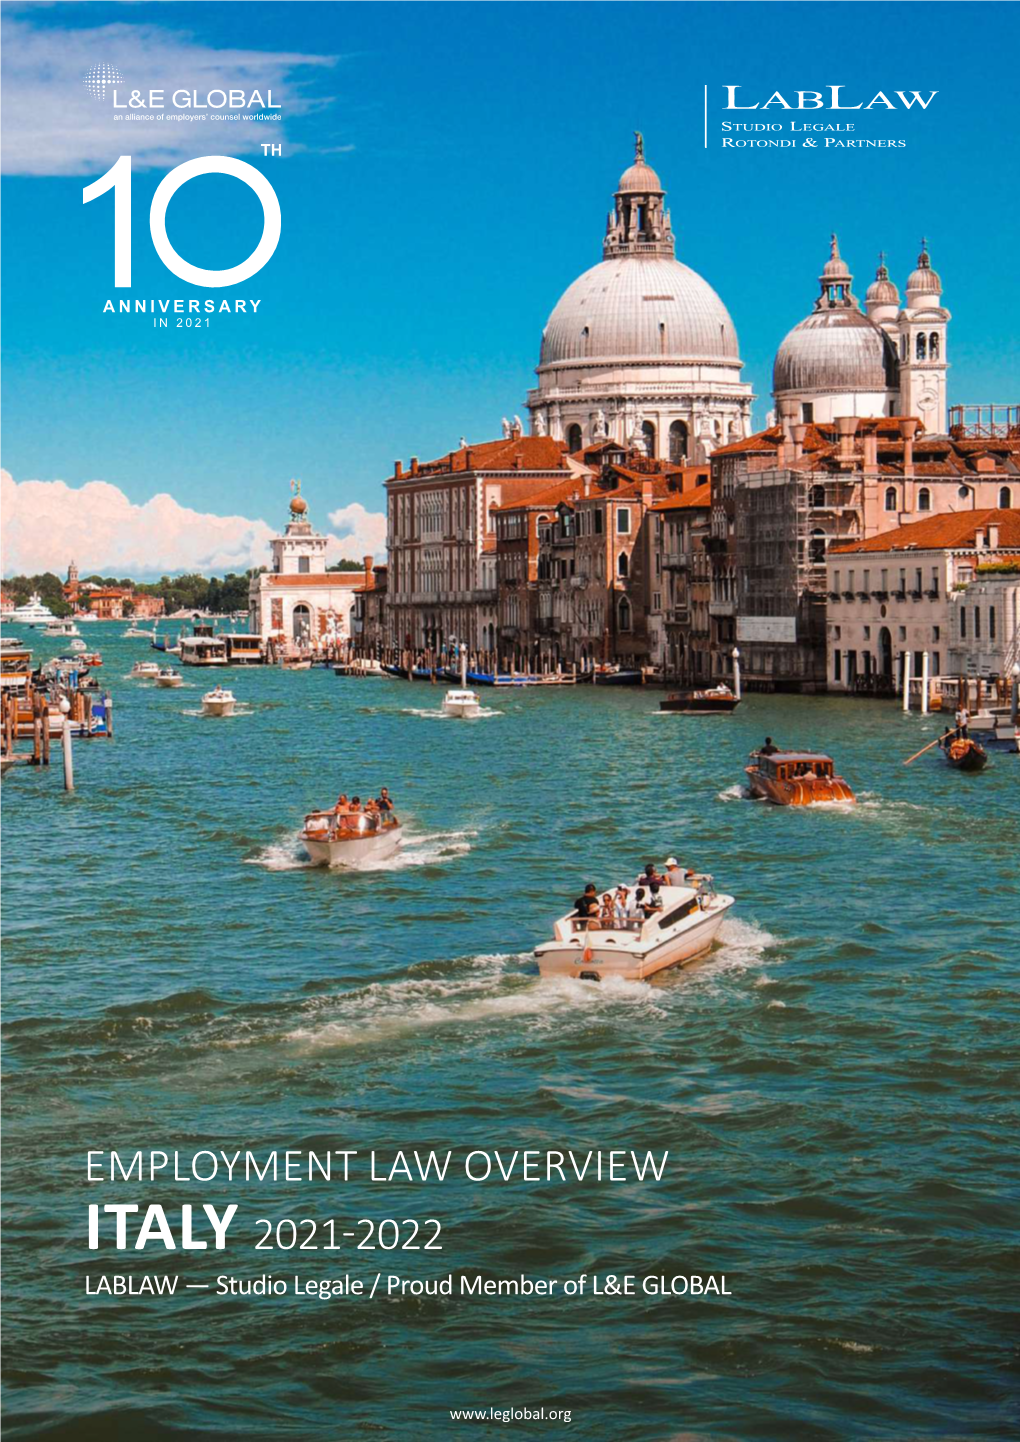 Employment Law Overview Italy 2021-2022 LABLAW — Studio Legale / Proud Member of L&E GLOBAL